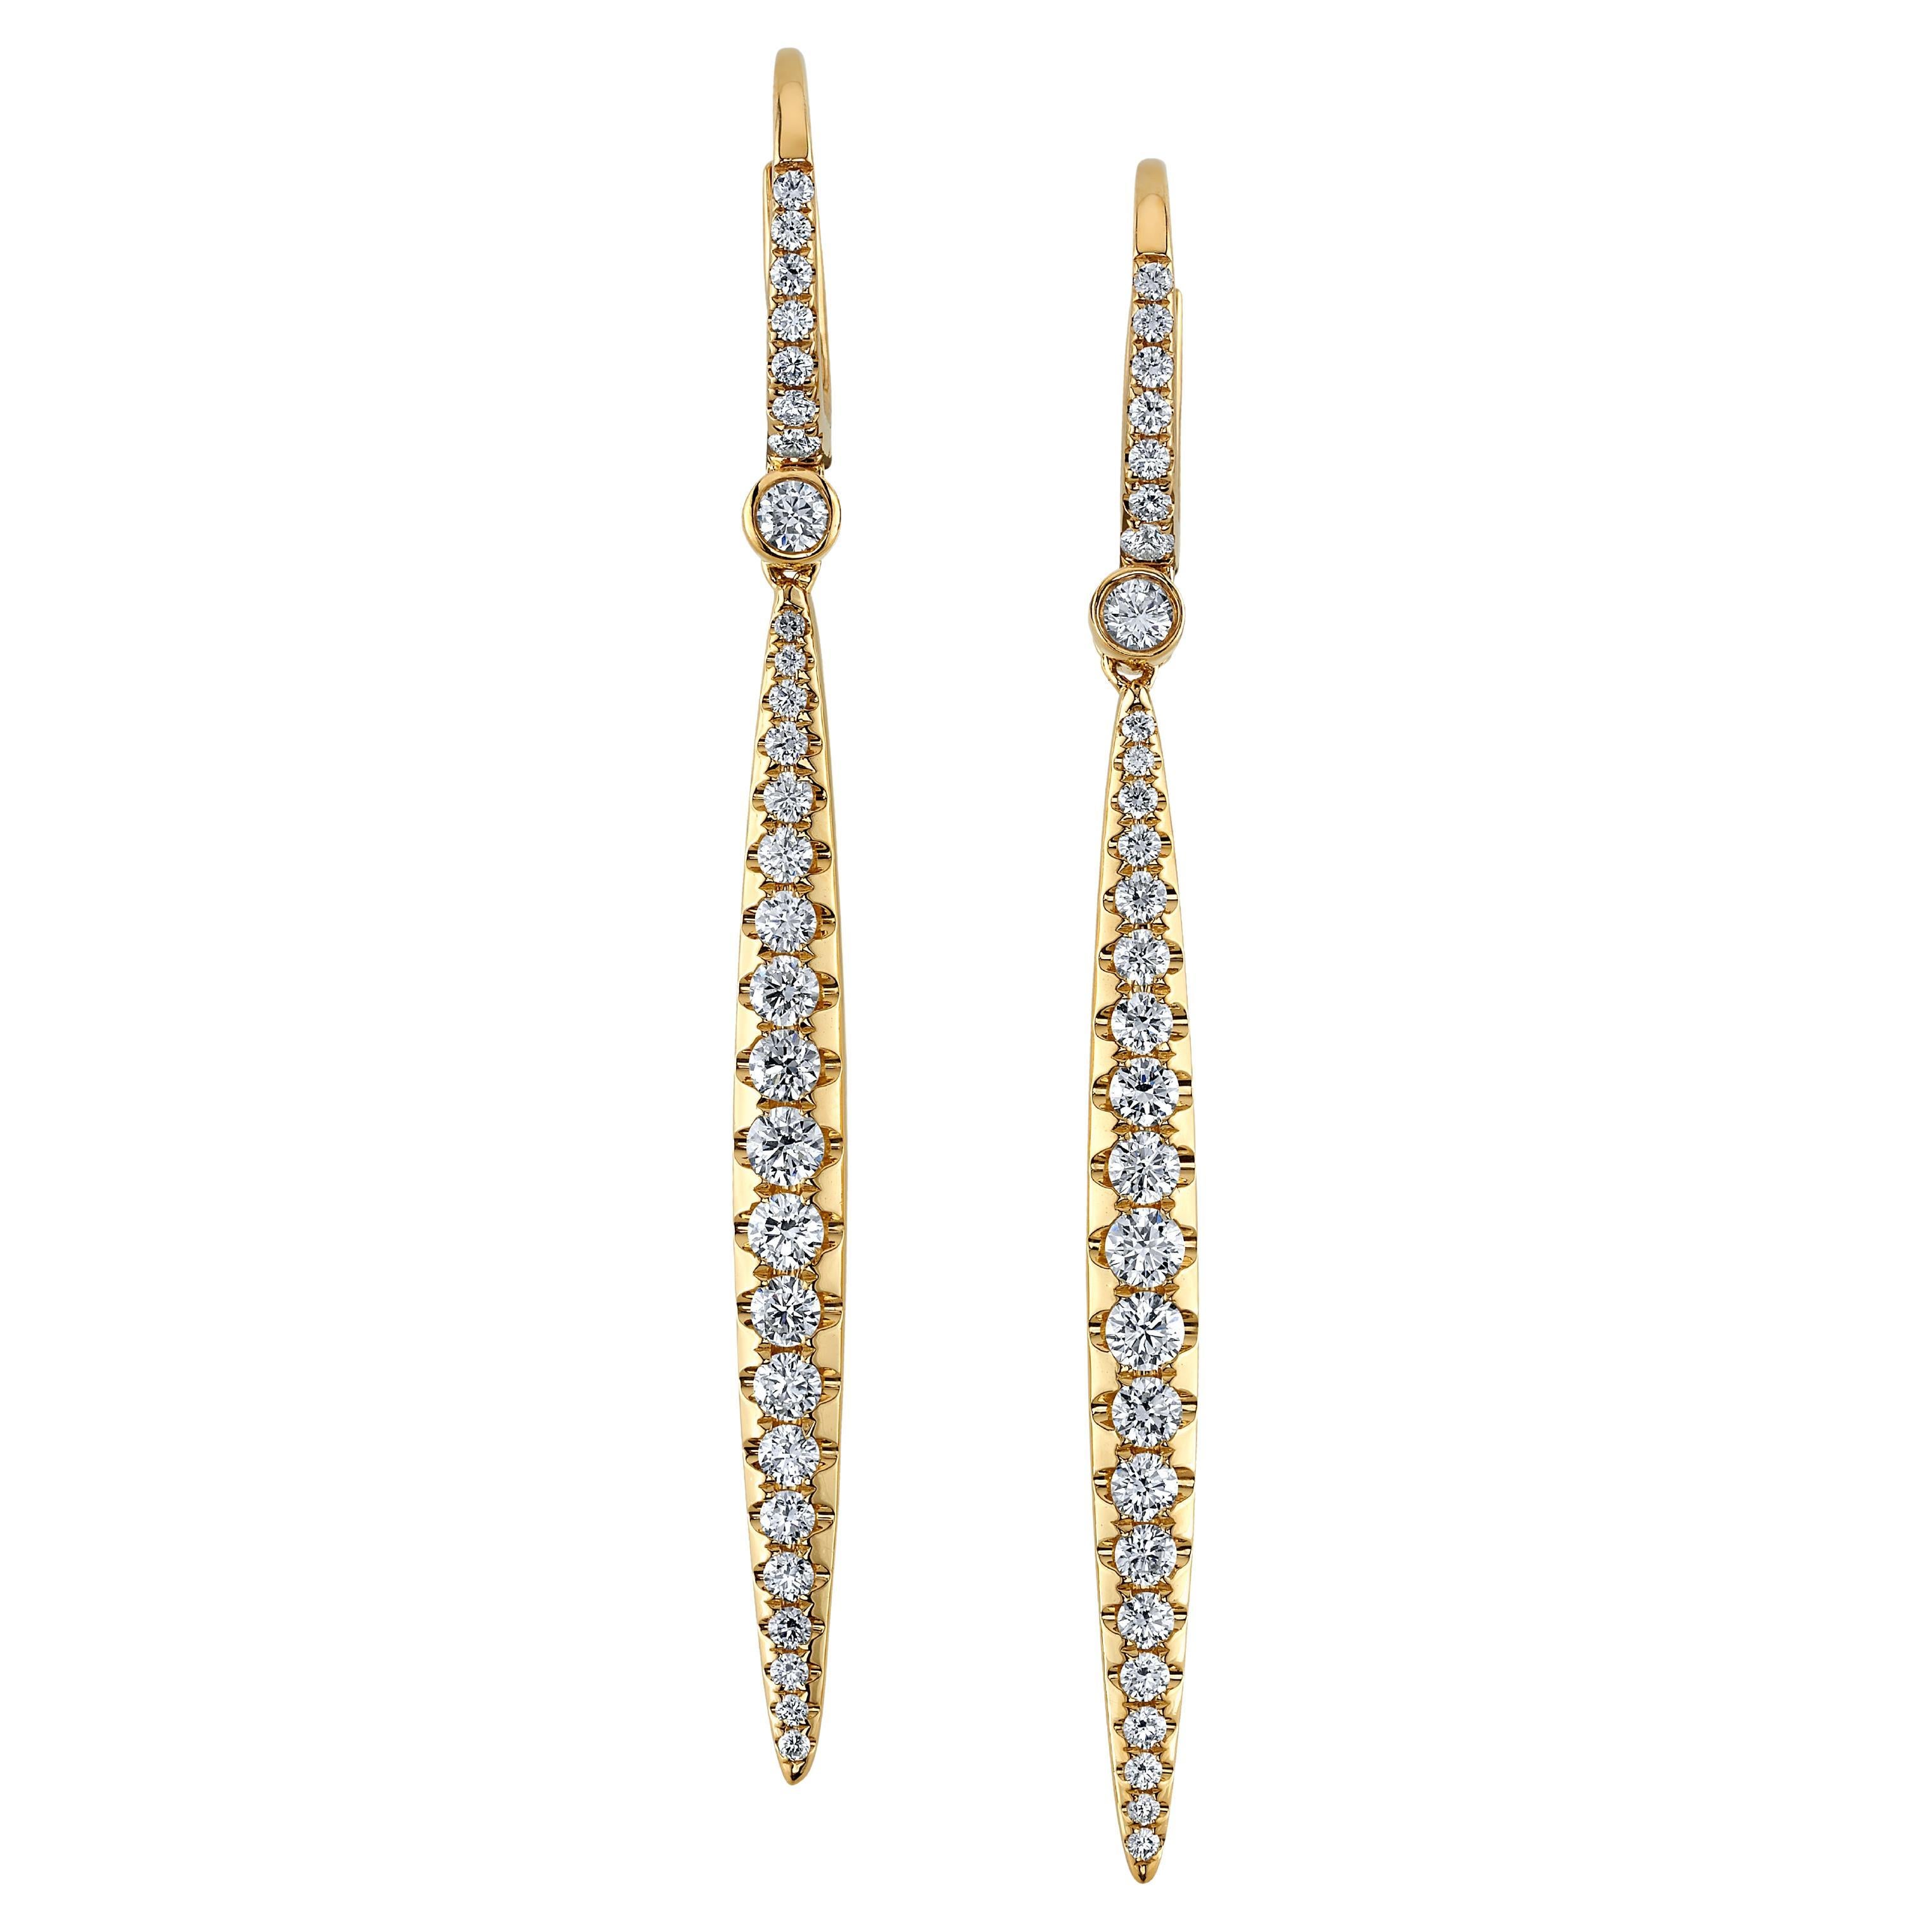 Diamond Pave Linear Dangling Earrings in Yellow Gold, 1.31 Carats Total  For Sale